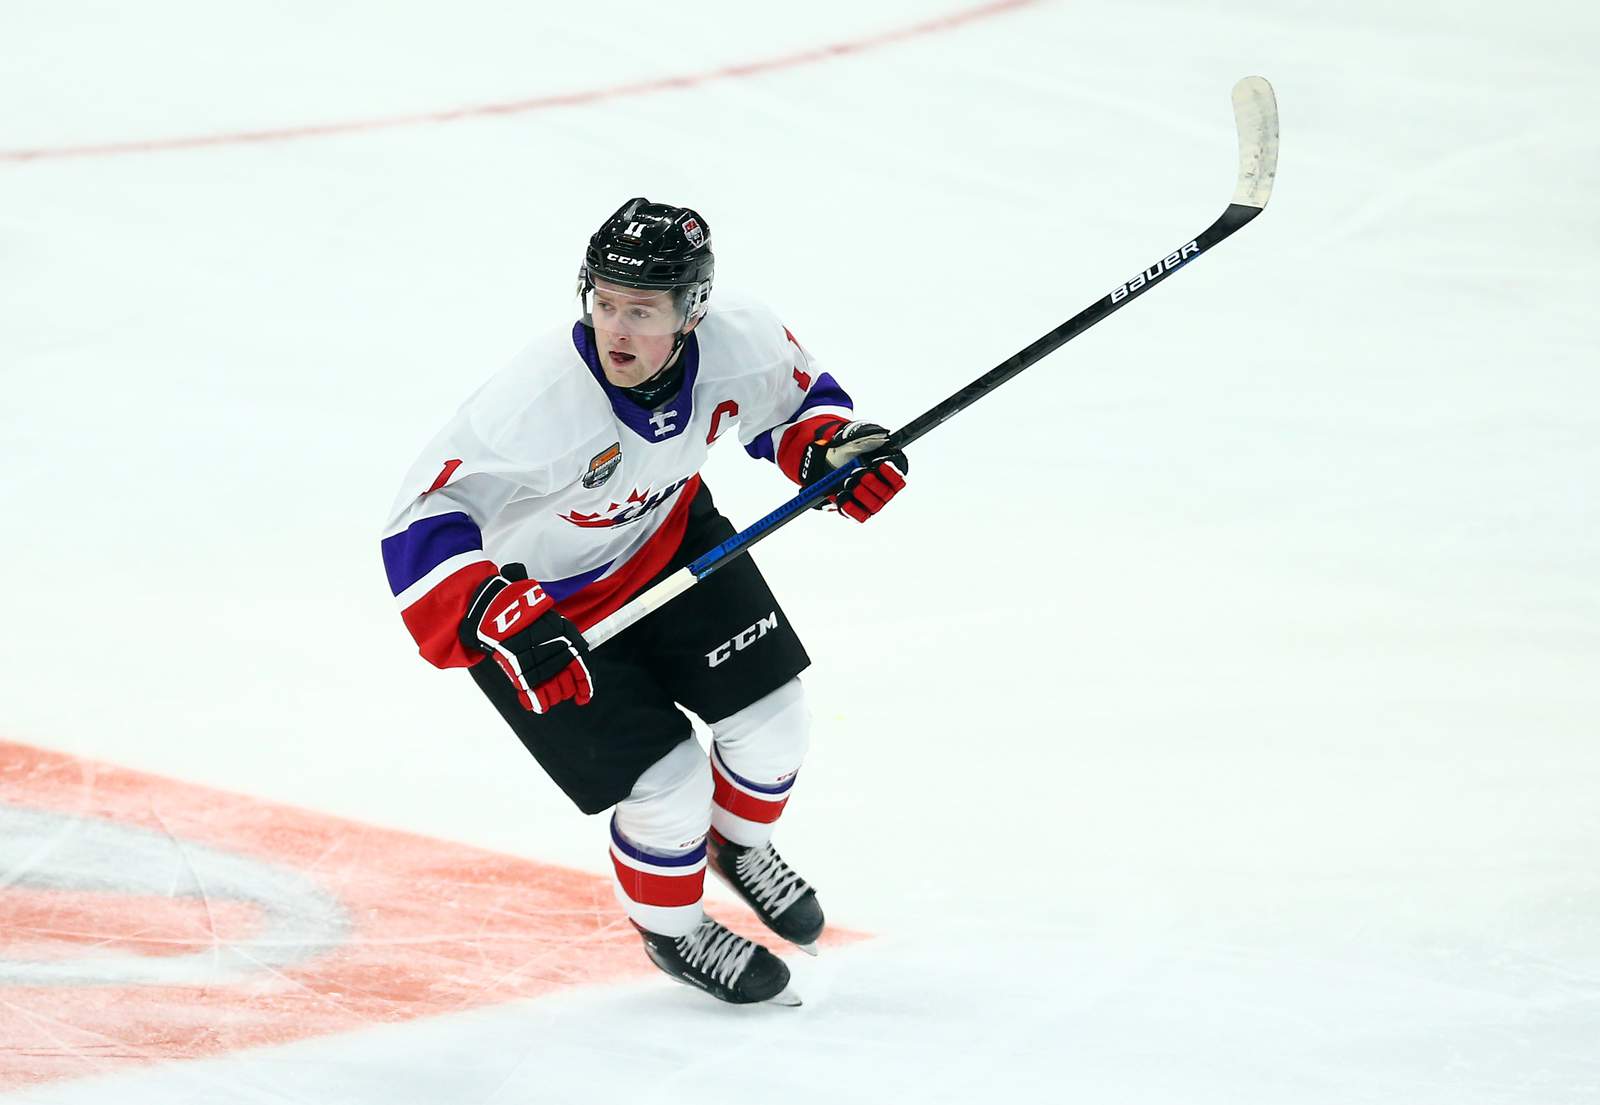 HAMILTON, ON - JANUARY 16:  Alexis Lafreniere #11 of Team White skates during the 2020 CHL/NHL Top Prospects Game against Team Red at FirstOntario Centre on January 16, 2020 in Hamilton, Canada.  (Photo by Vaughn Ridley/Getty Images)